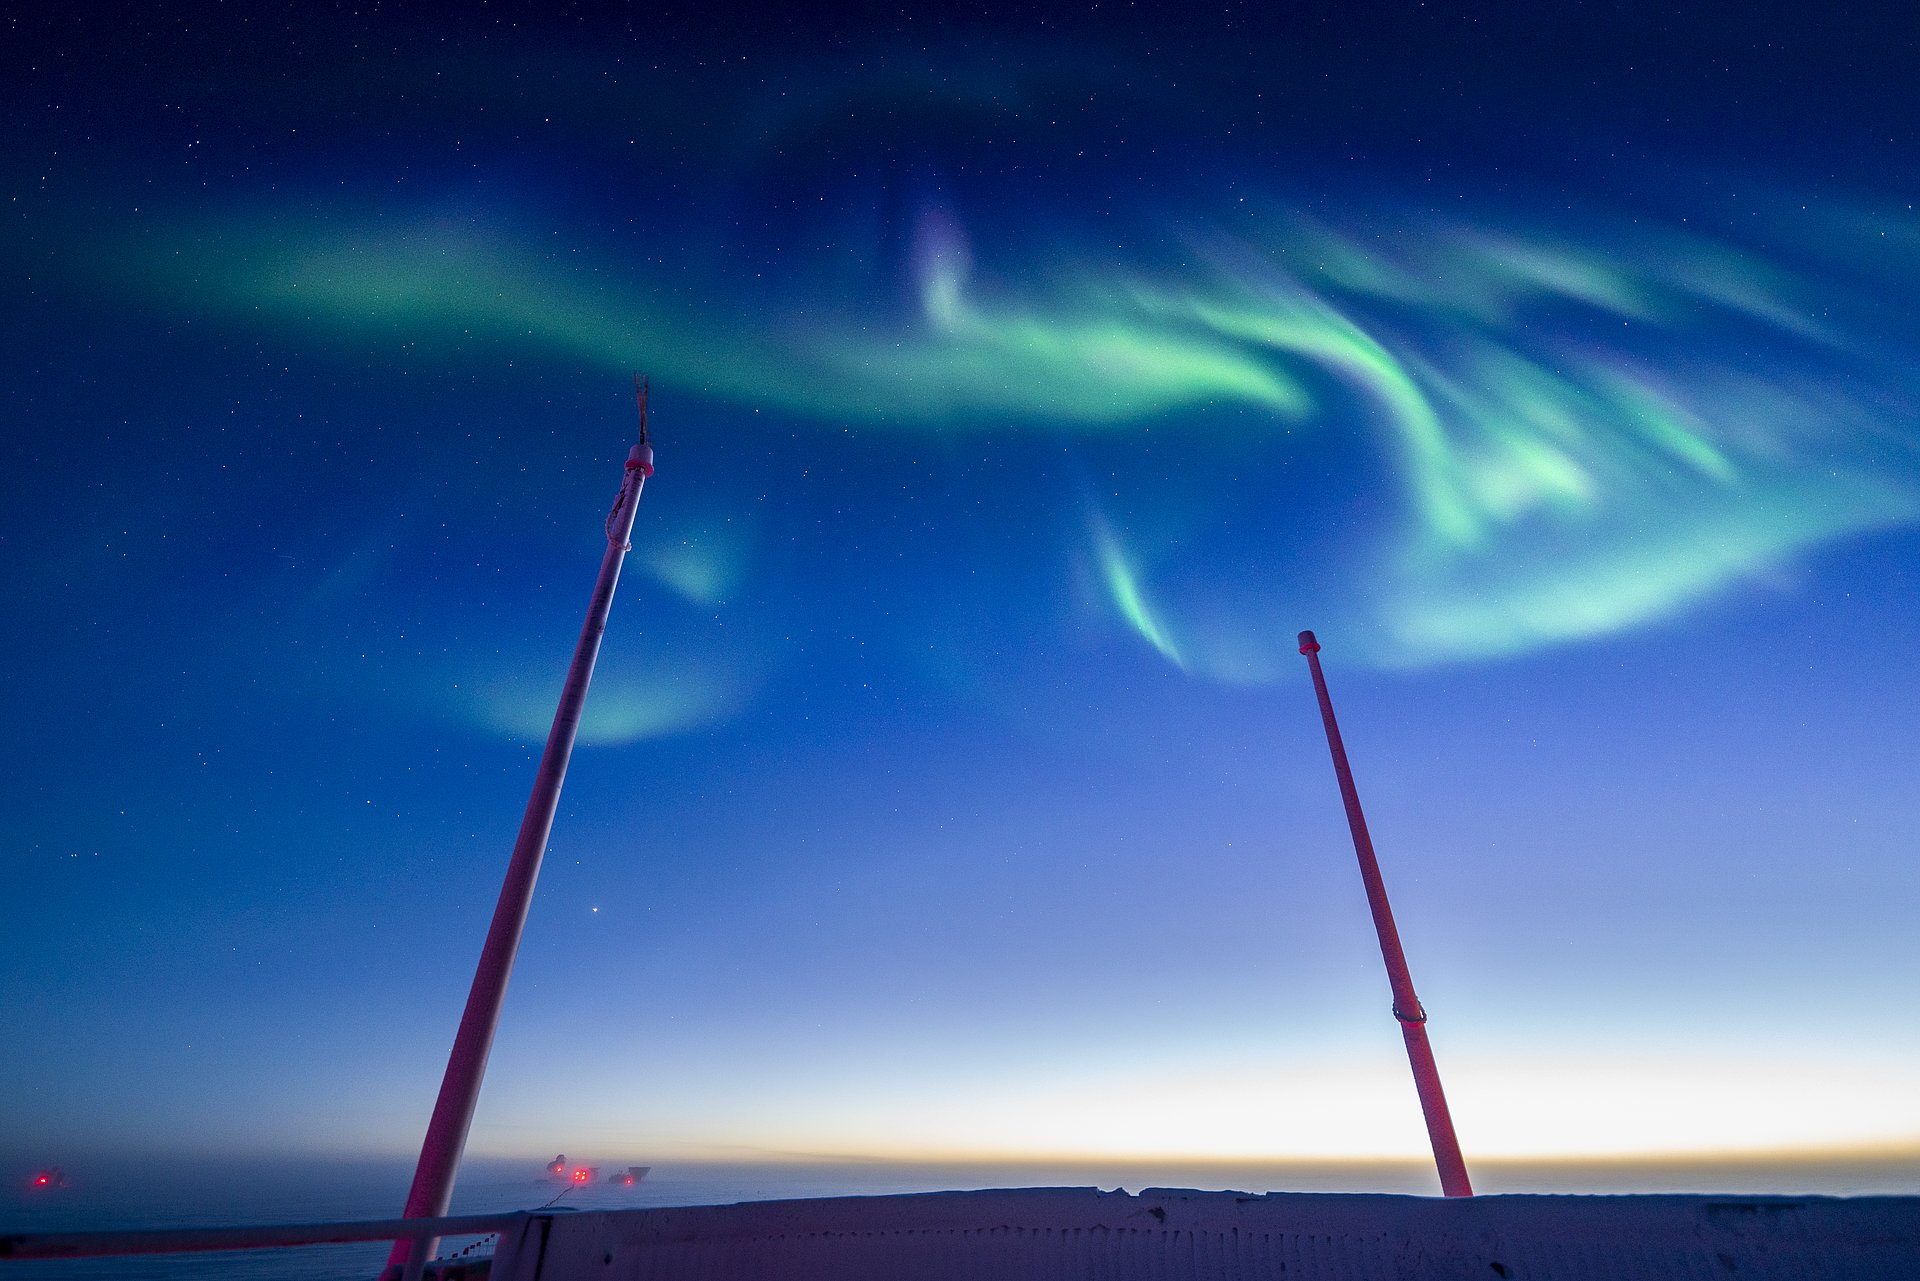 Along with the stars, from time to time the Antarctic night sky is lit up by auroras.